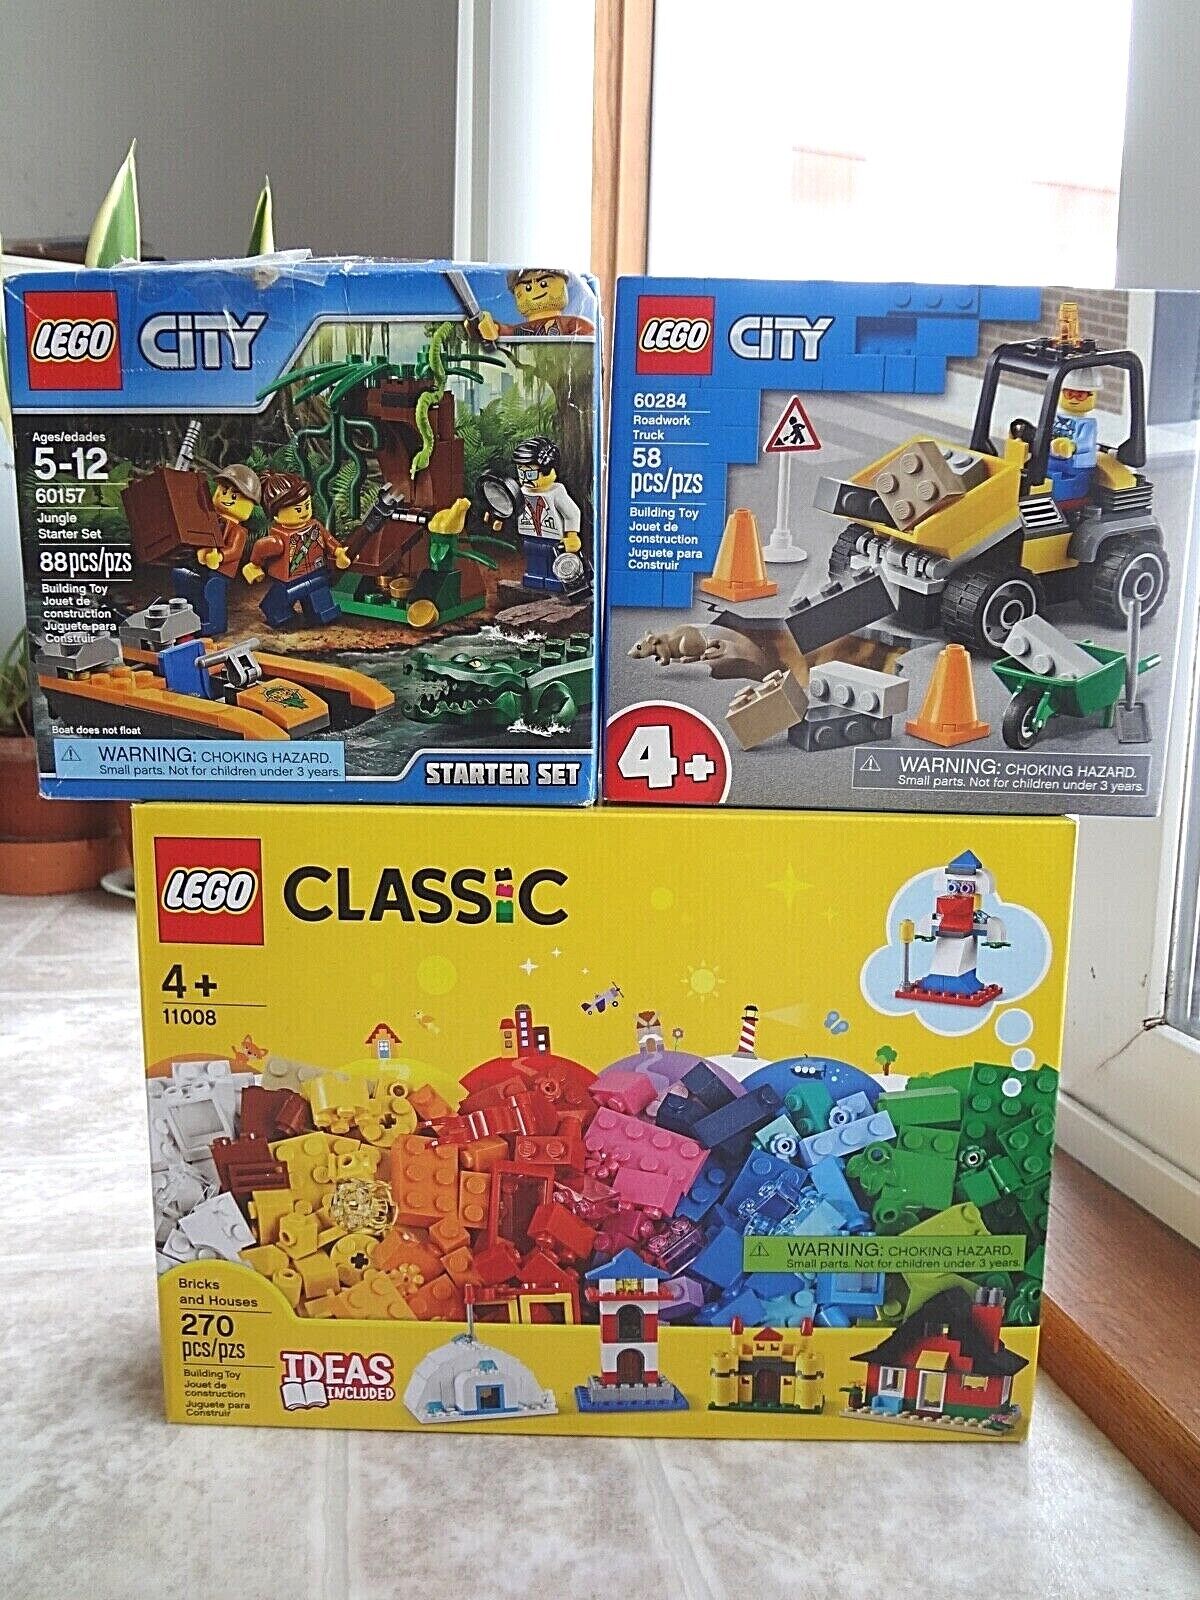 LEGO Classic 11008 + City 60284 (New) Free Shipping